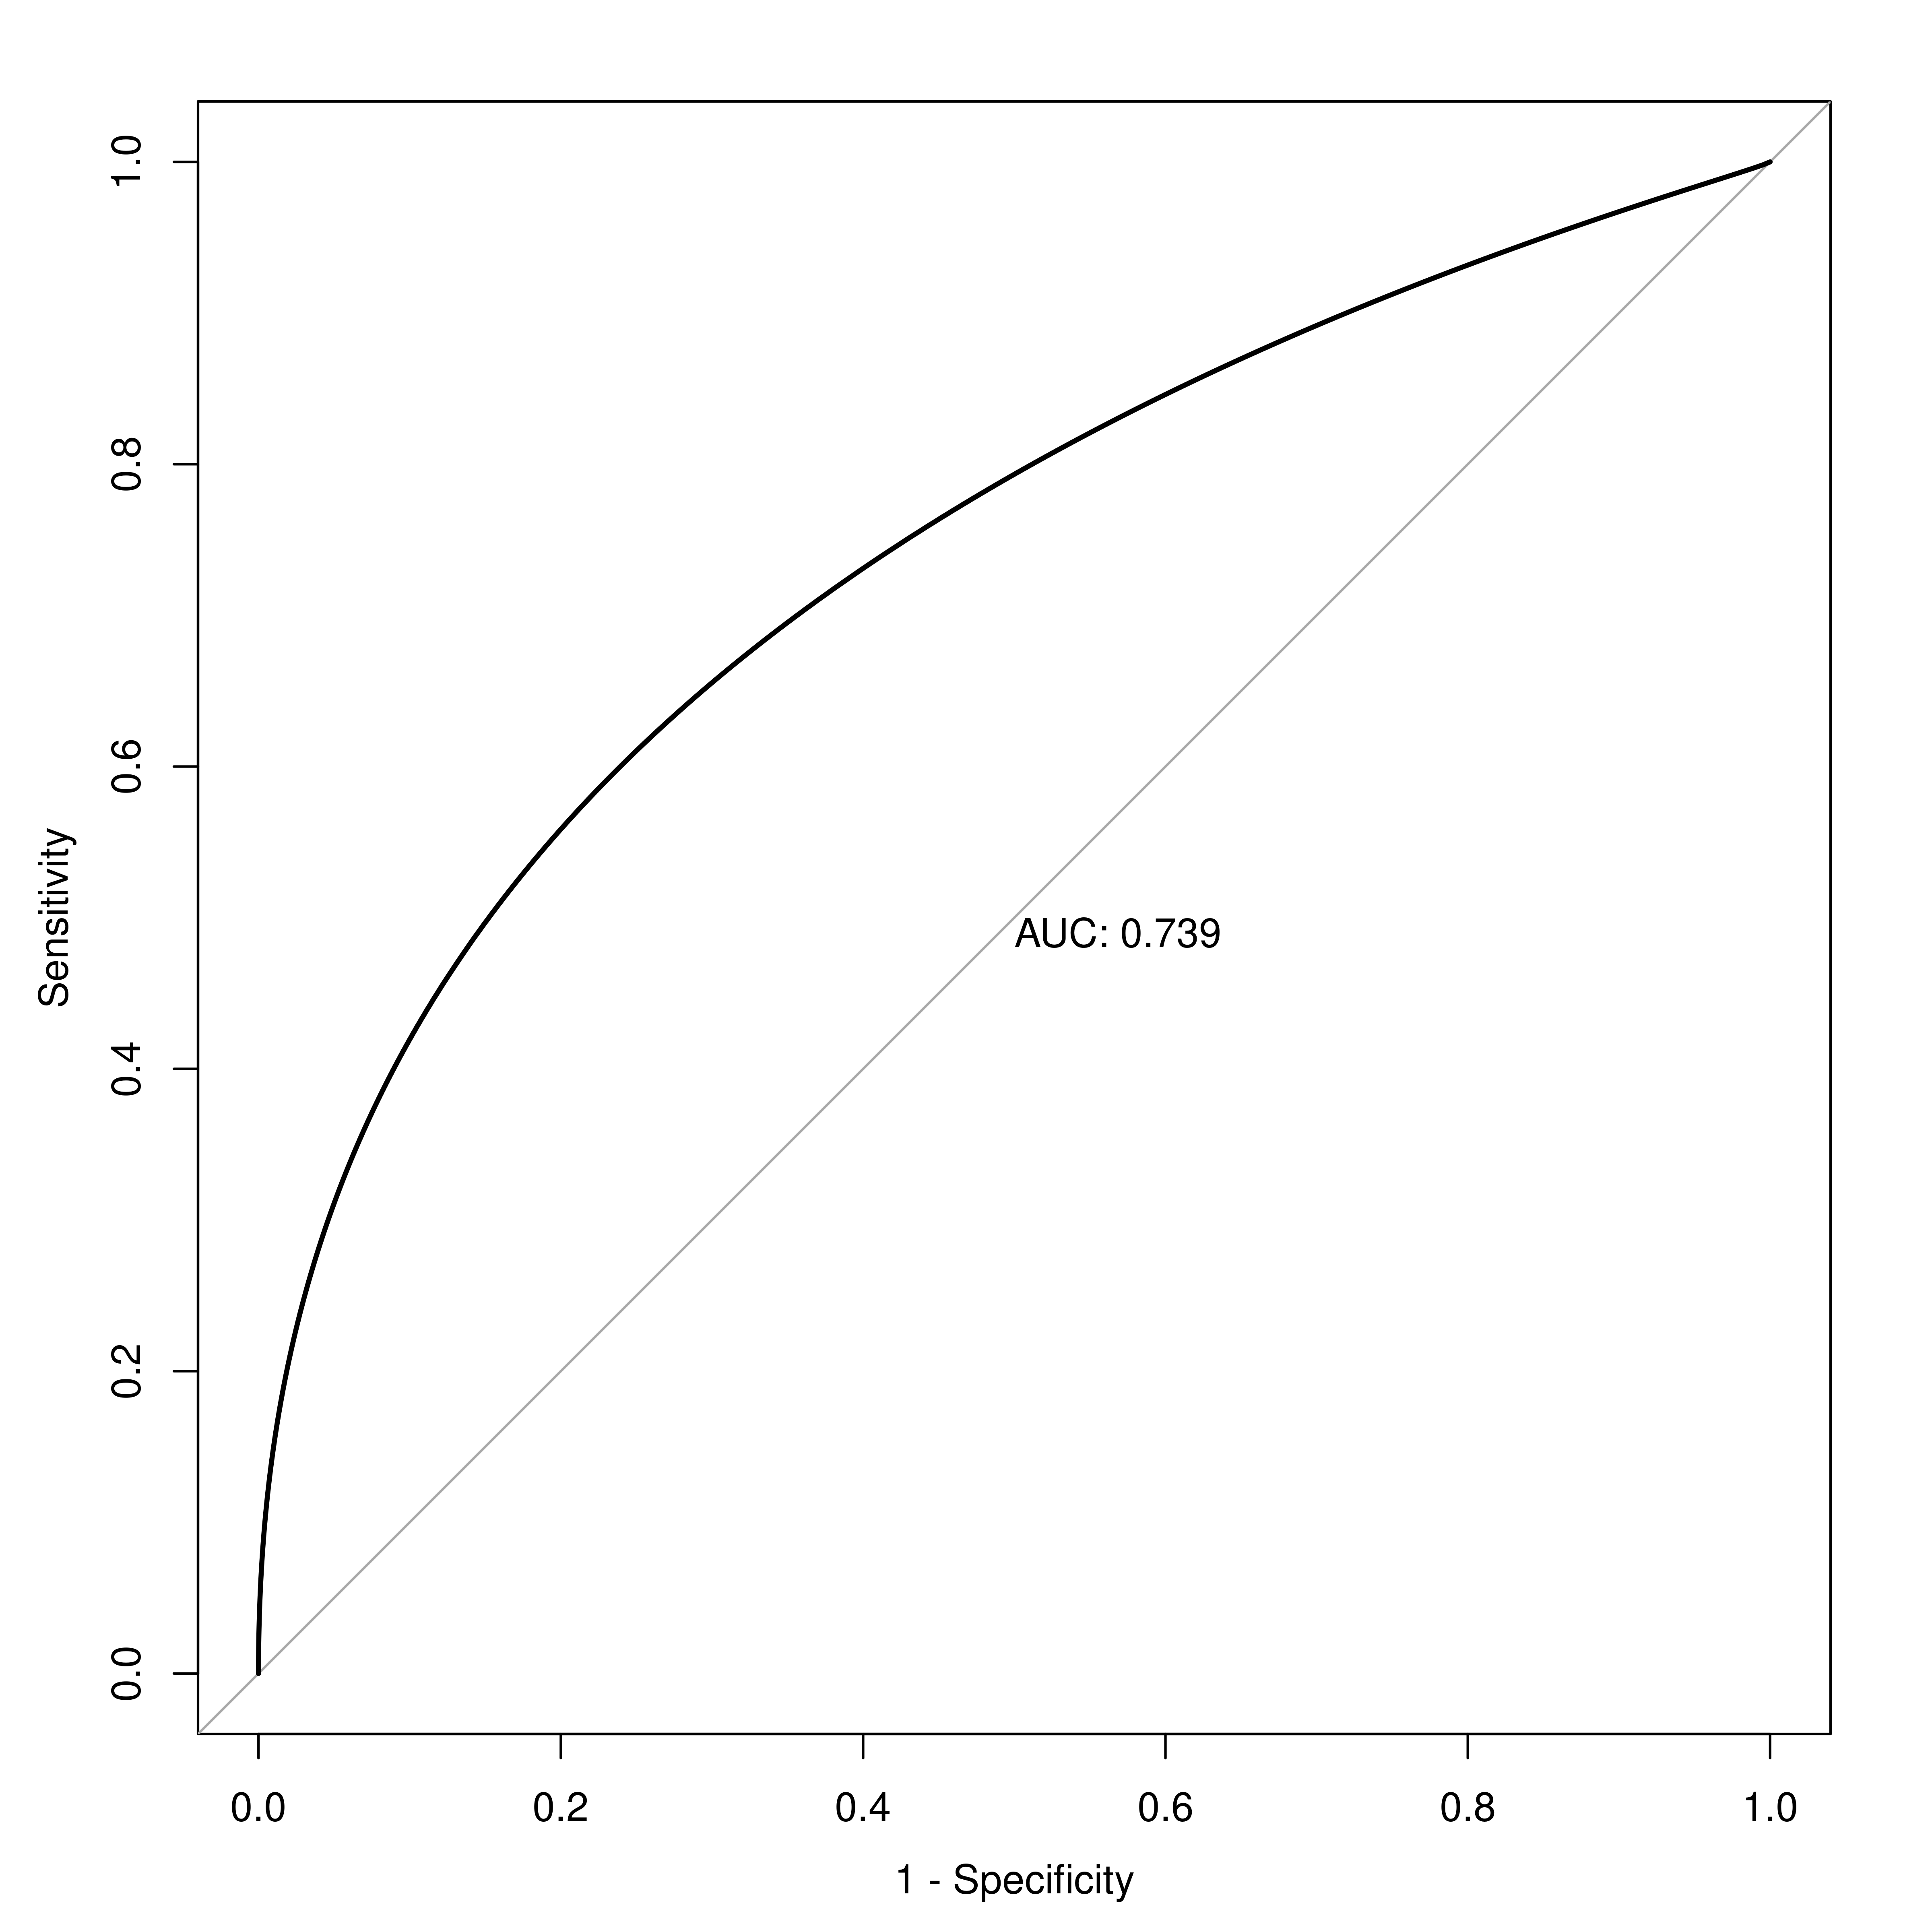 Smooth Receiver Operating Characteristic Curve. AUC = Area under the receiver operating characteristic curve.